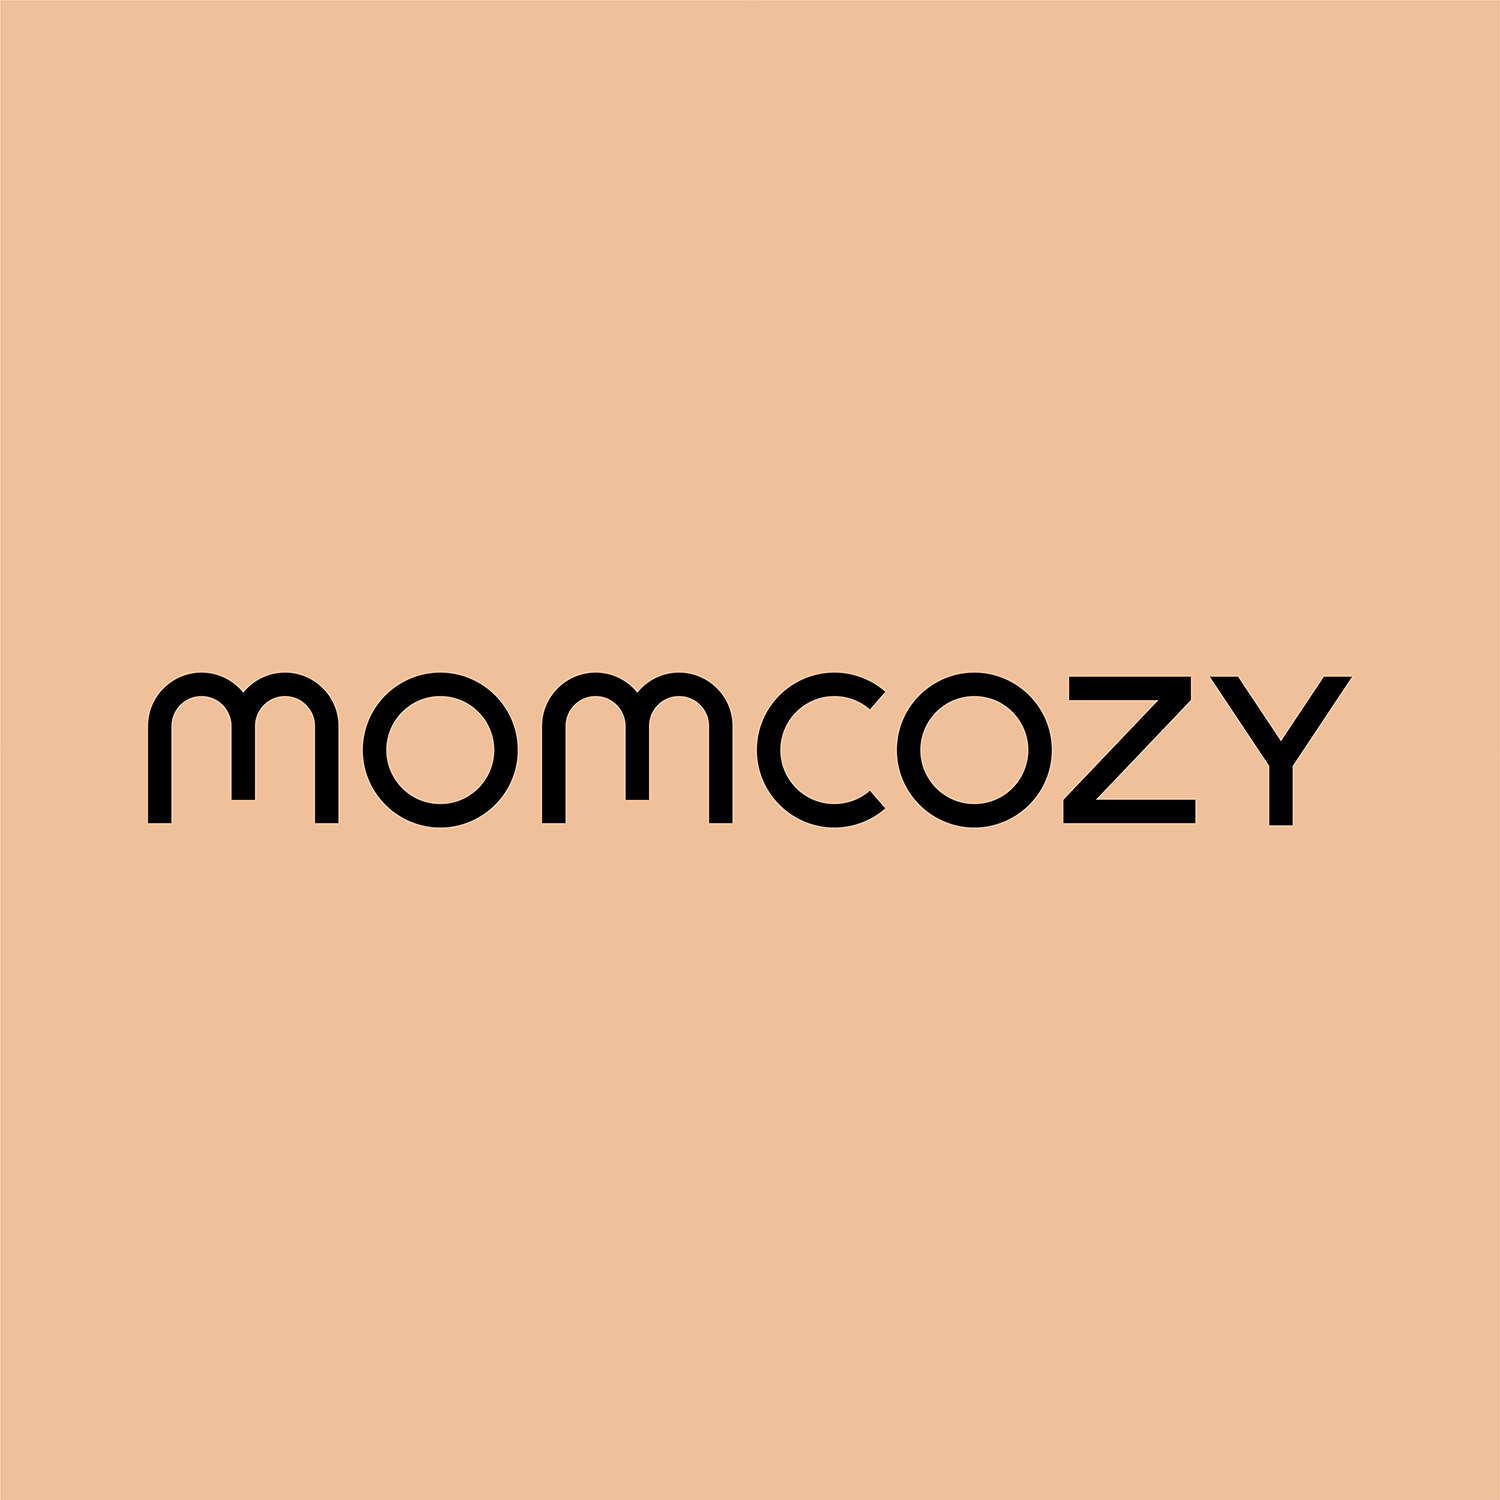 Love me some @momcozy bras and pumps here are my top favorites ill